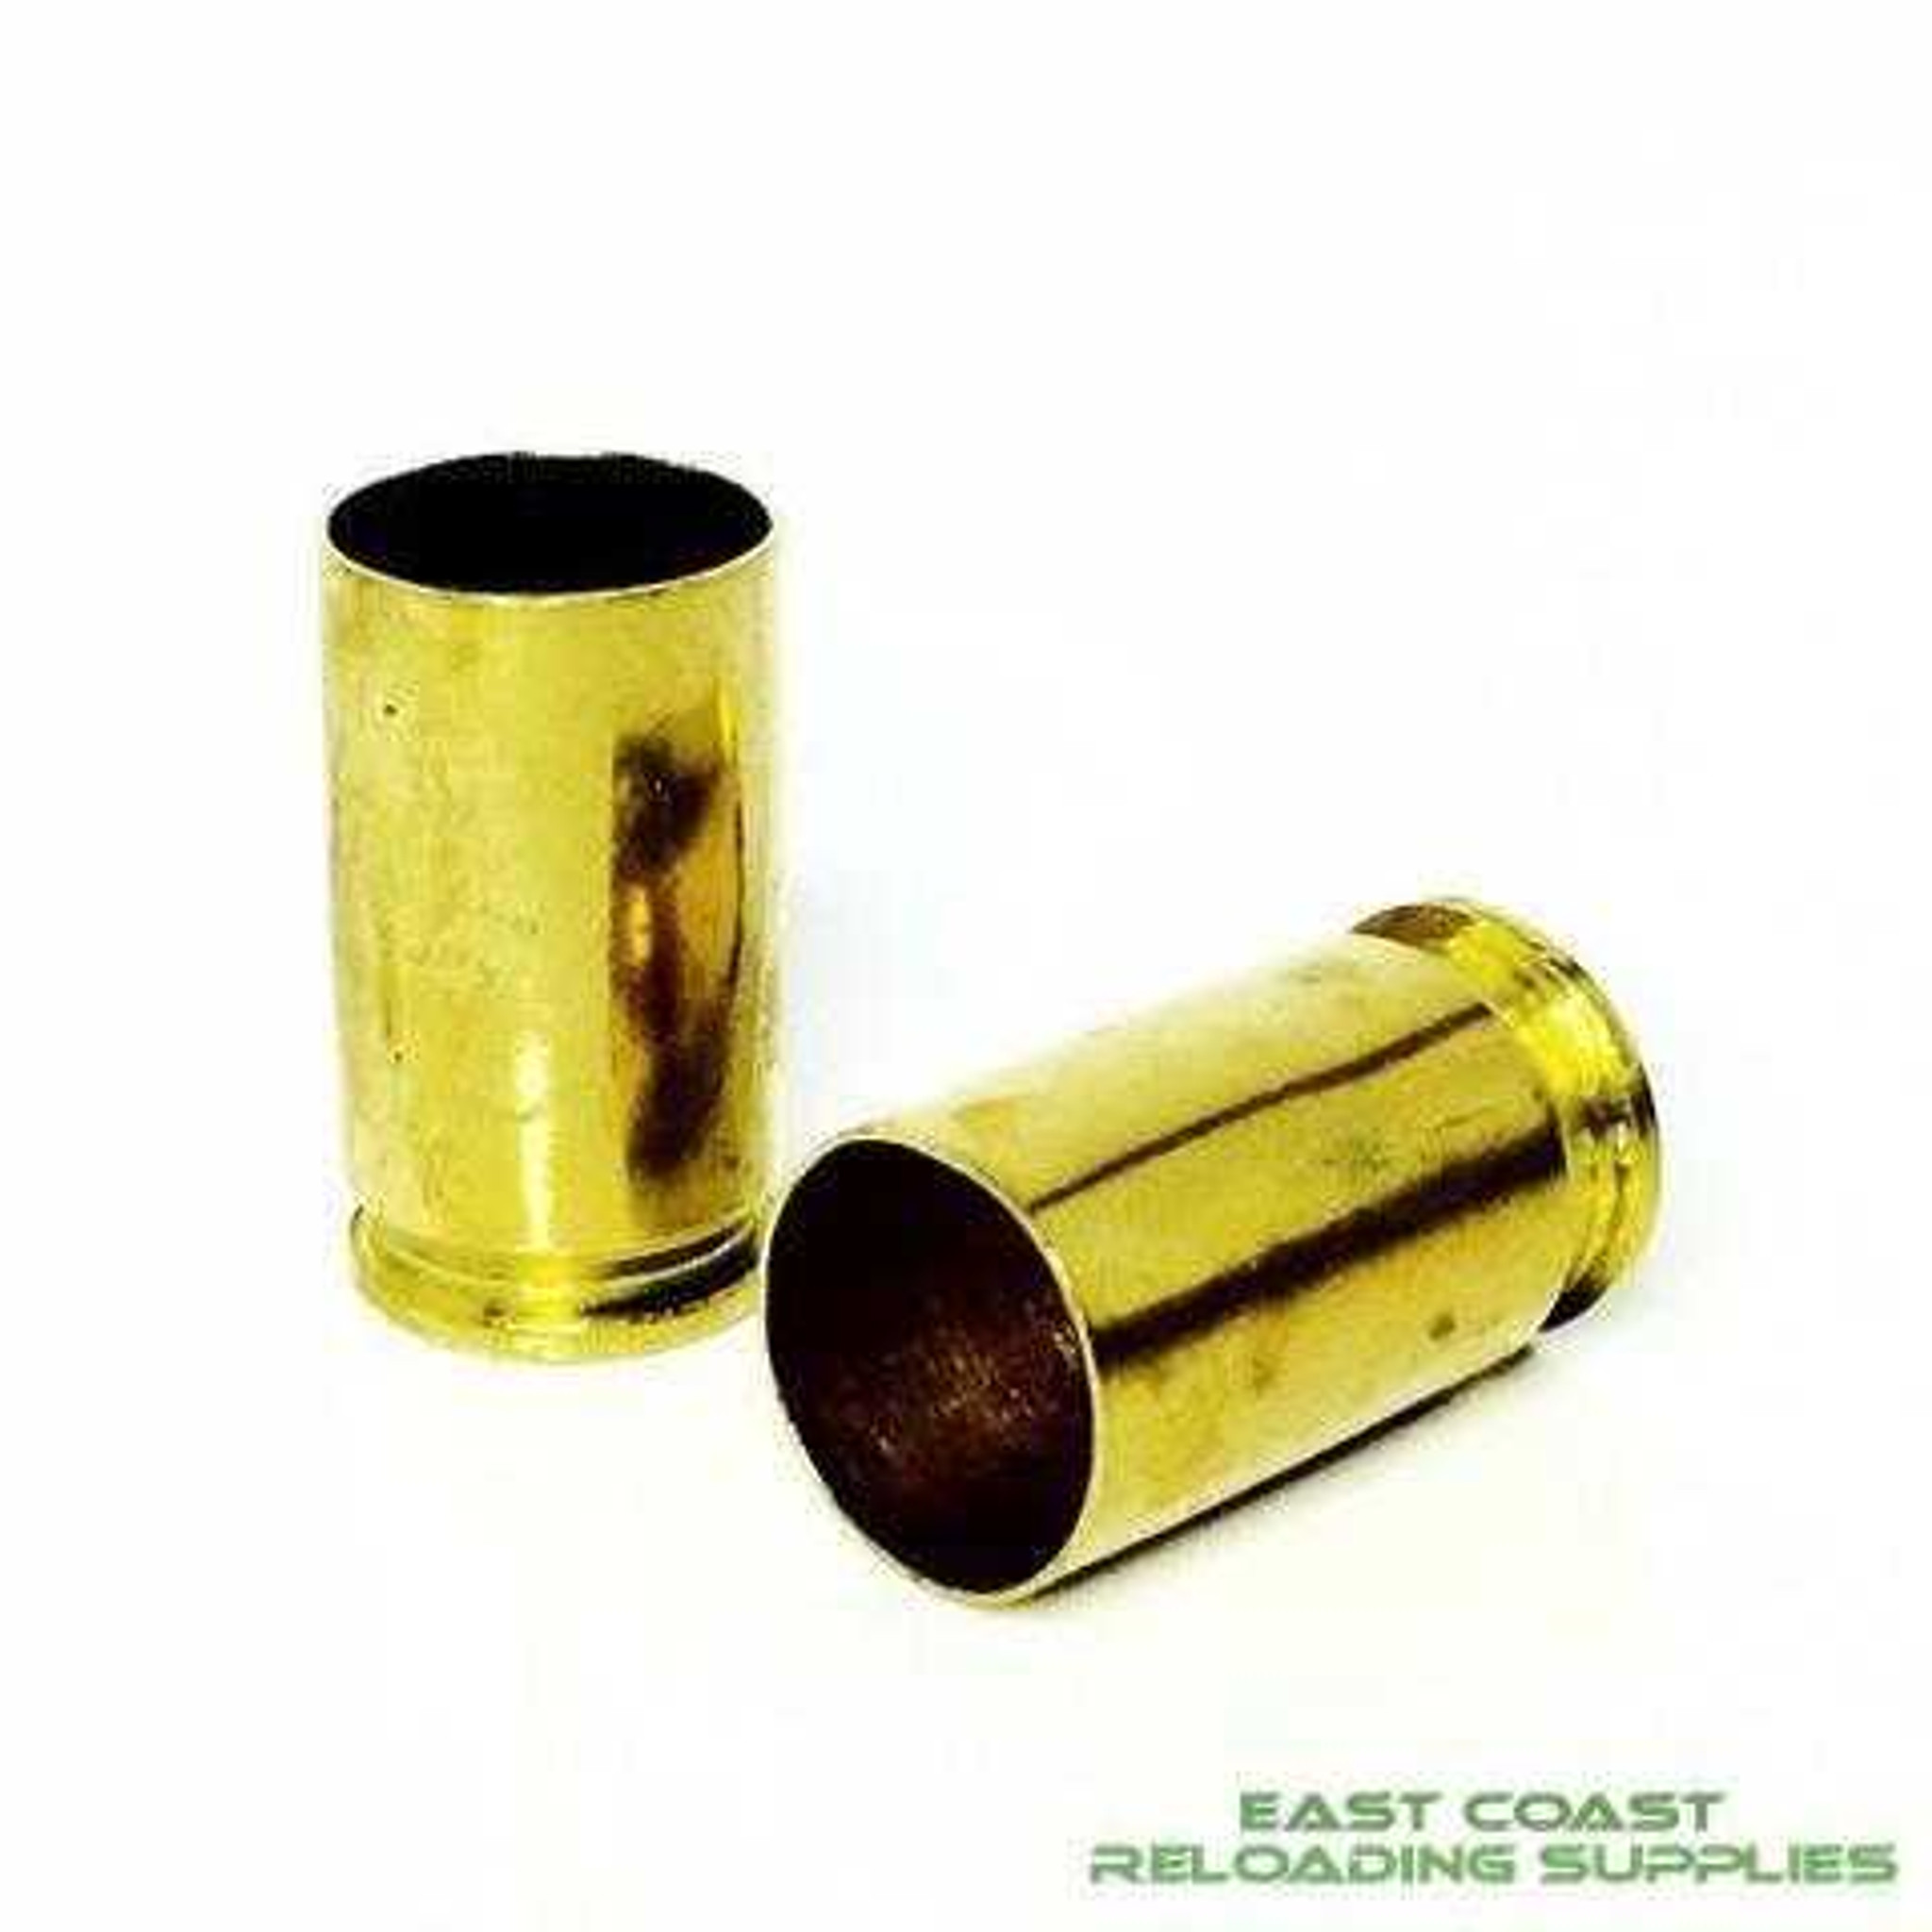 22 Caliber Empty Brass Shells Used Bullet Casings Once Fired